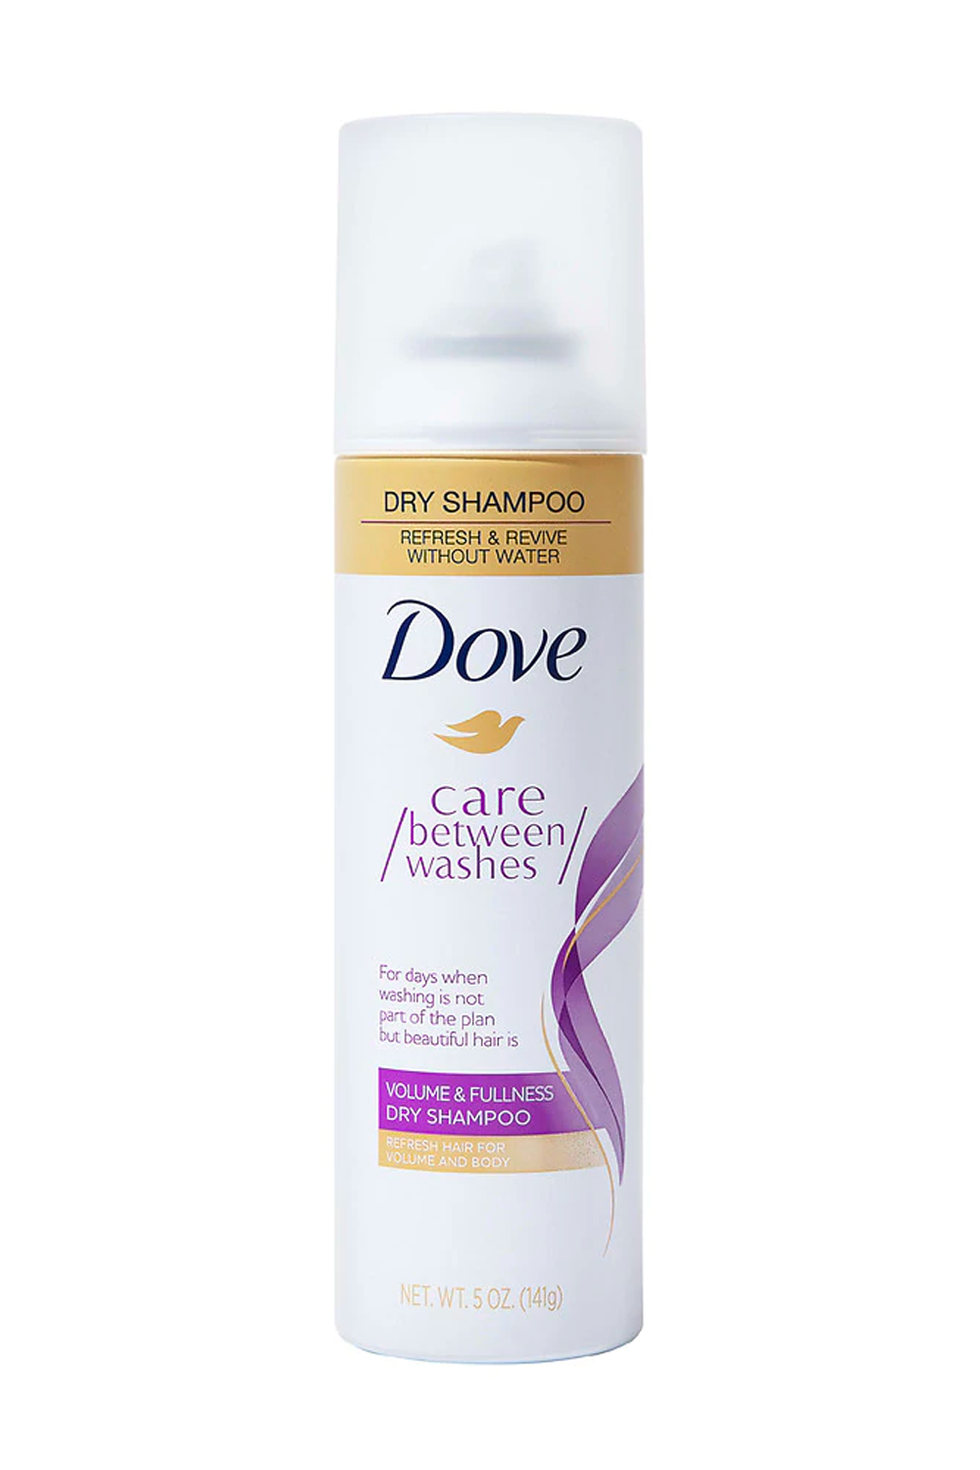 Dove Care Between Washes Dry Shampoo Hair Treatment